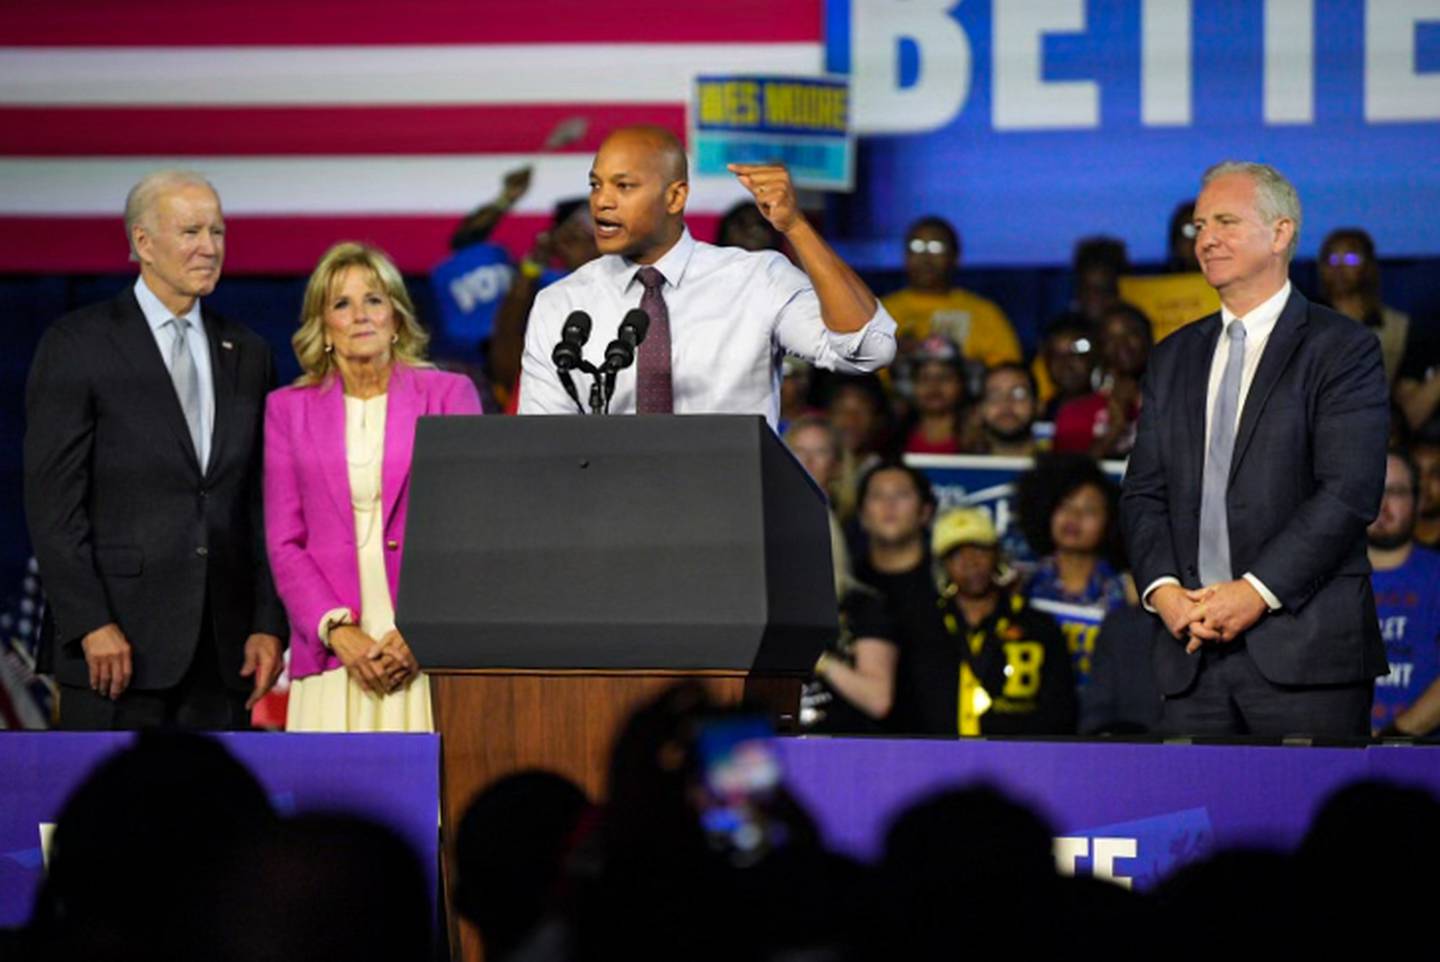 Gubernatorial candidate Wes Moore, flanked by the First Family, Joe and Jill Biden, and Sen. Chris Van Hollen, speaks at a campaign event on 11/7/22 at Bowie State University, the night before the general election.